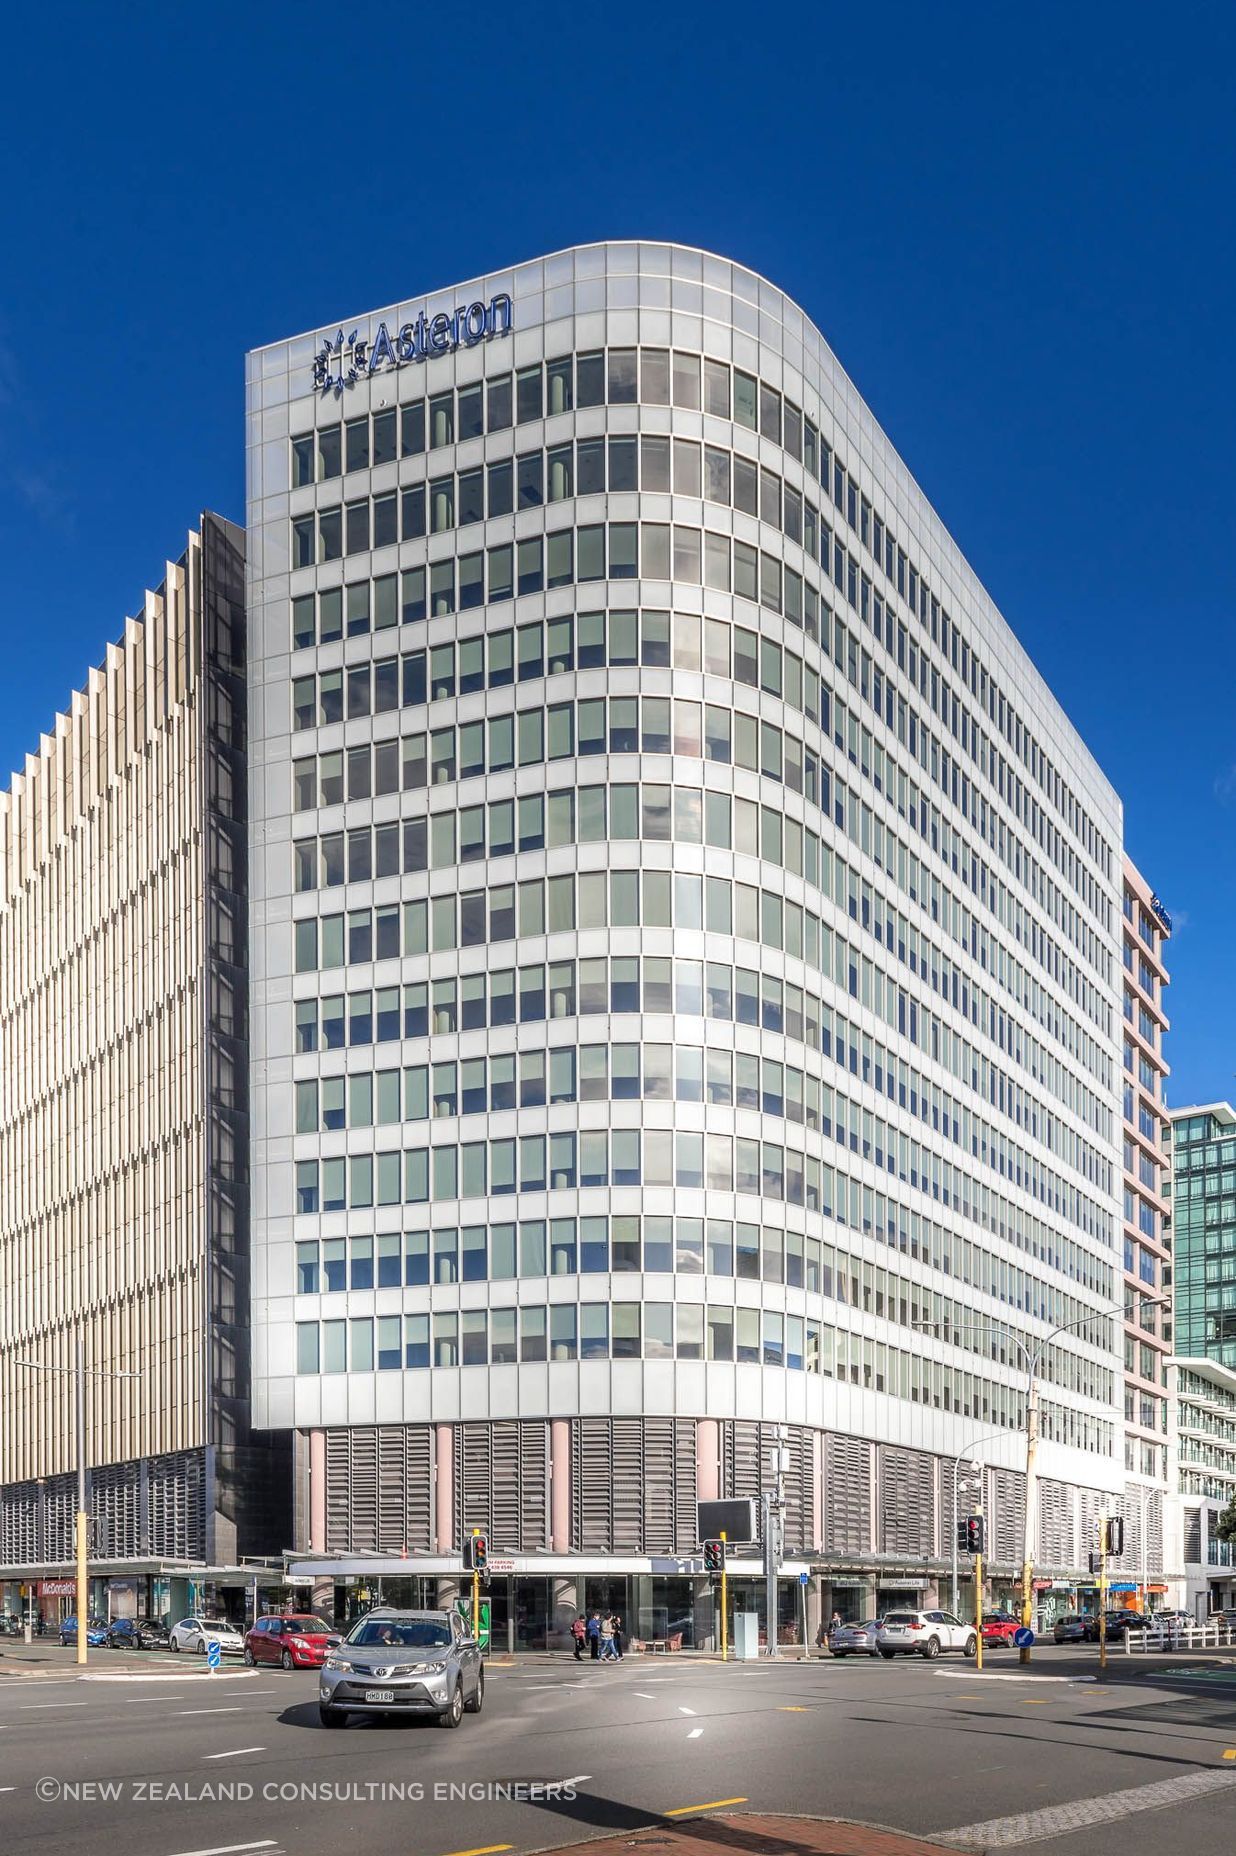 The Asteron Centre is Wellington's largest single-office building, located directly across from the bustling Wellington Train Station.